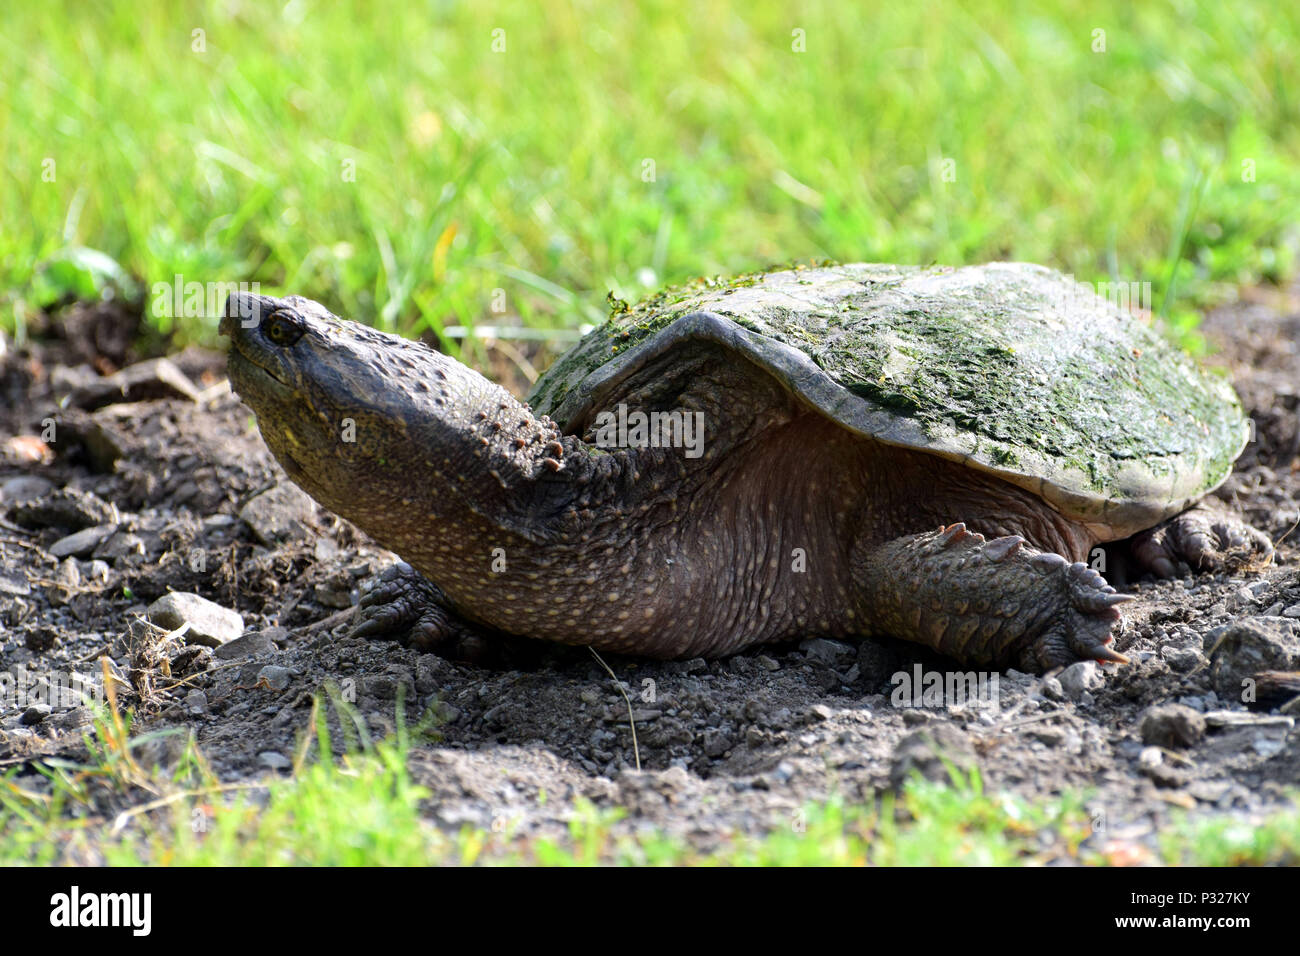 Snapping turtle on the roadside Stock Photo